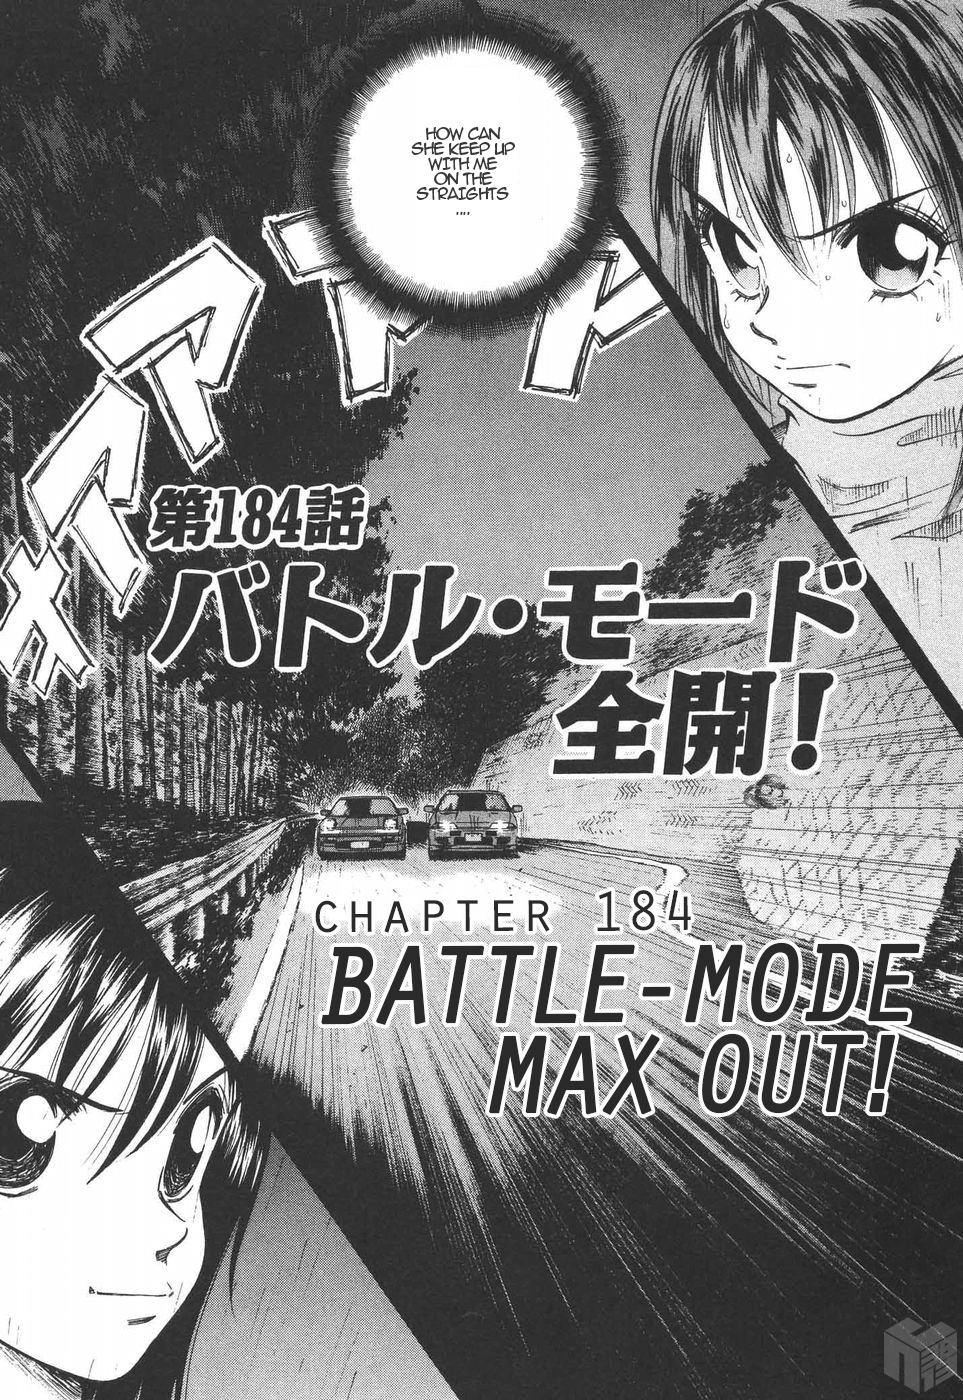 Over Rev! Vol.17 Chapter 184: Battle-Mode Max Out! - Picture 1